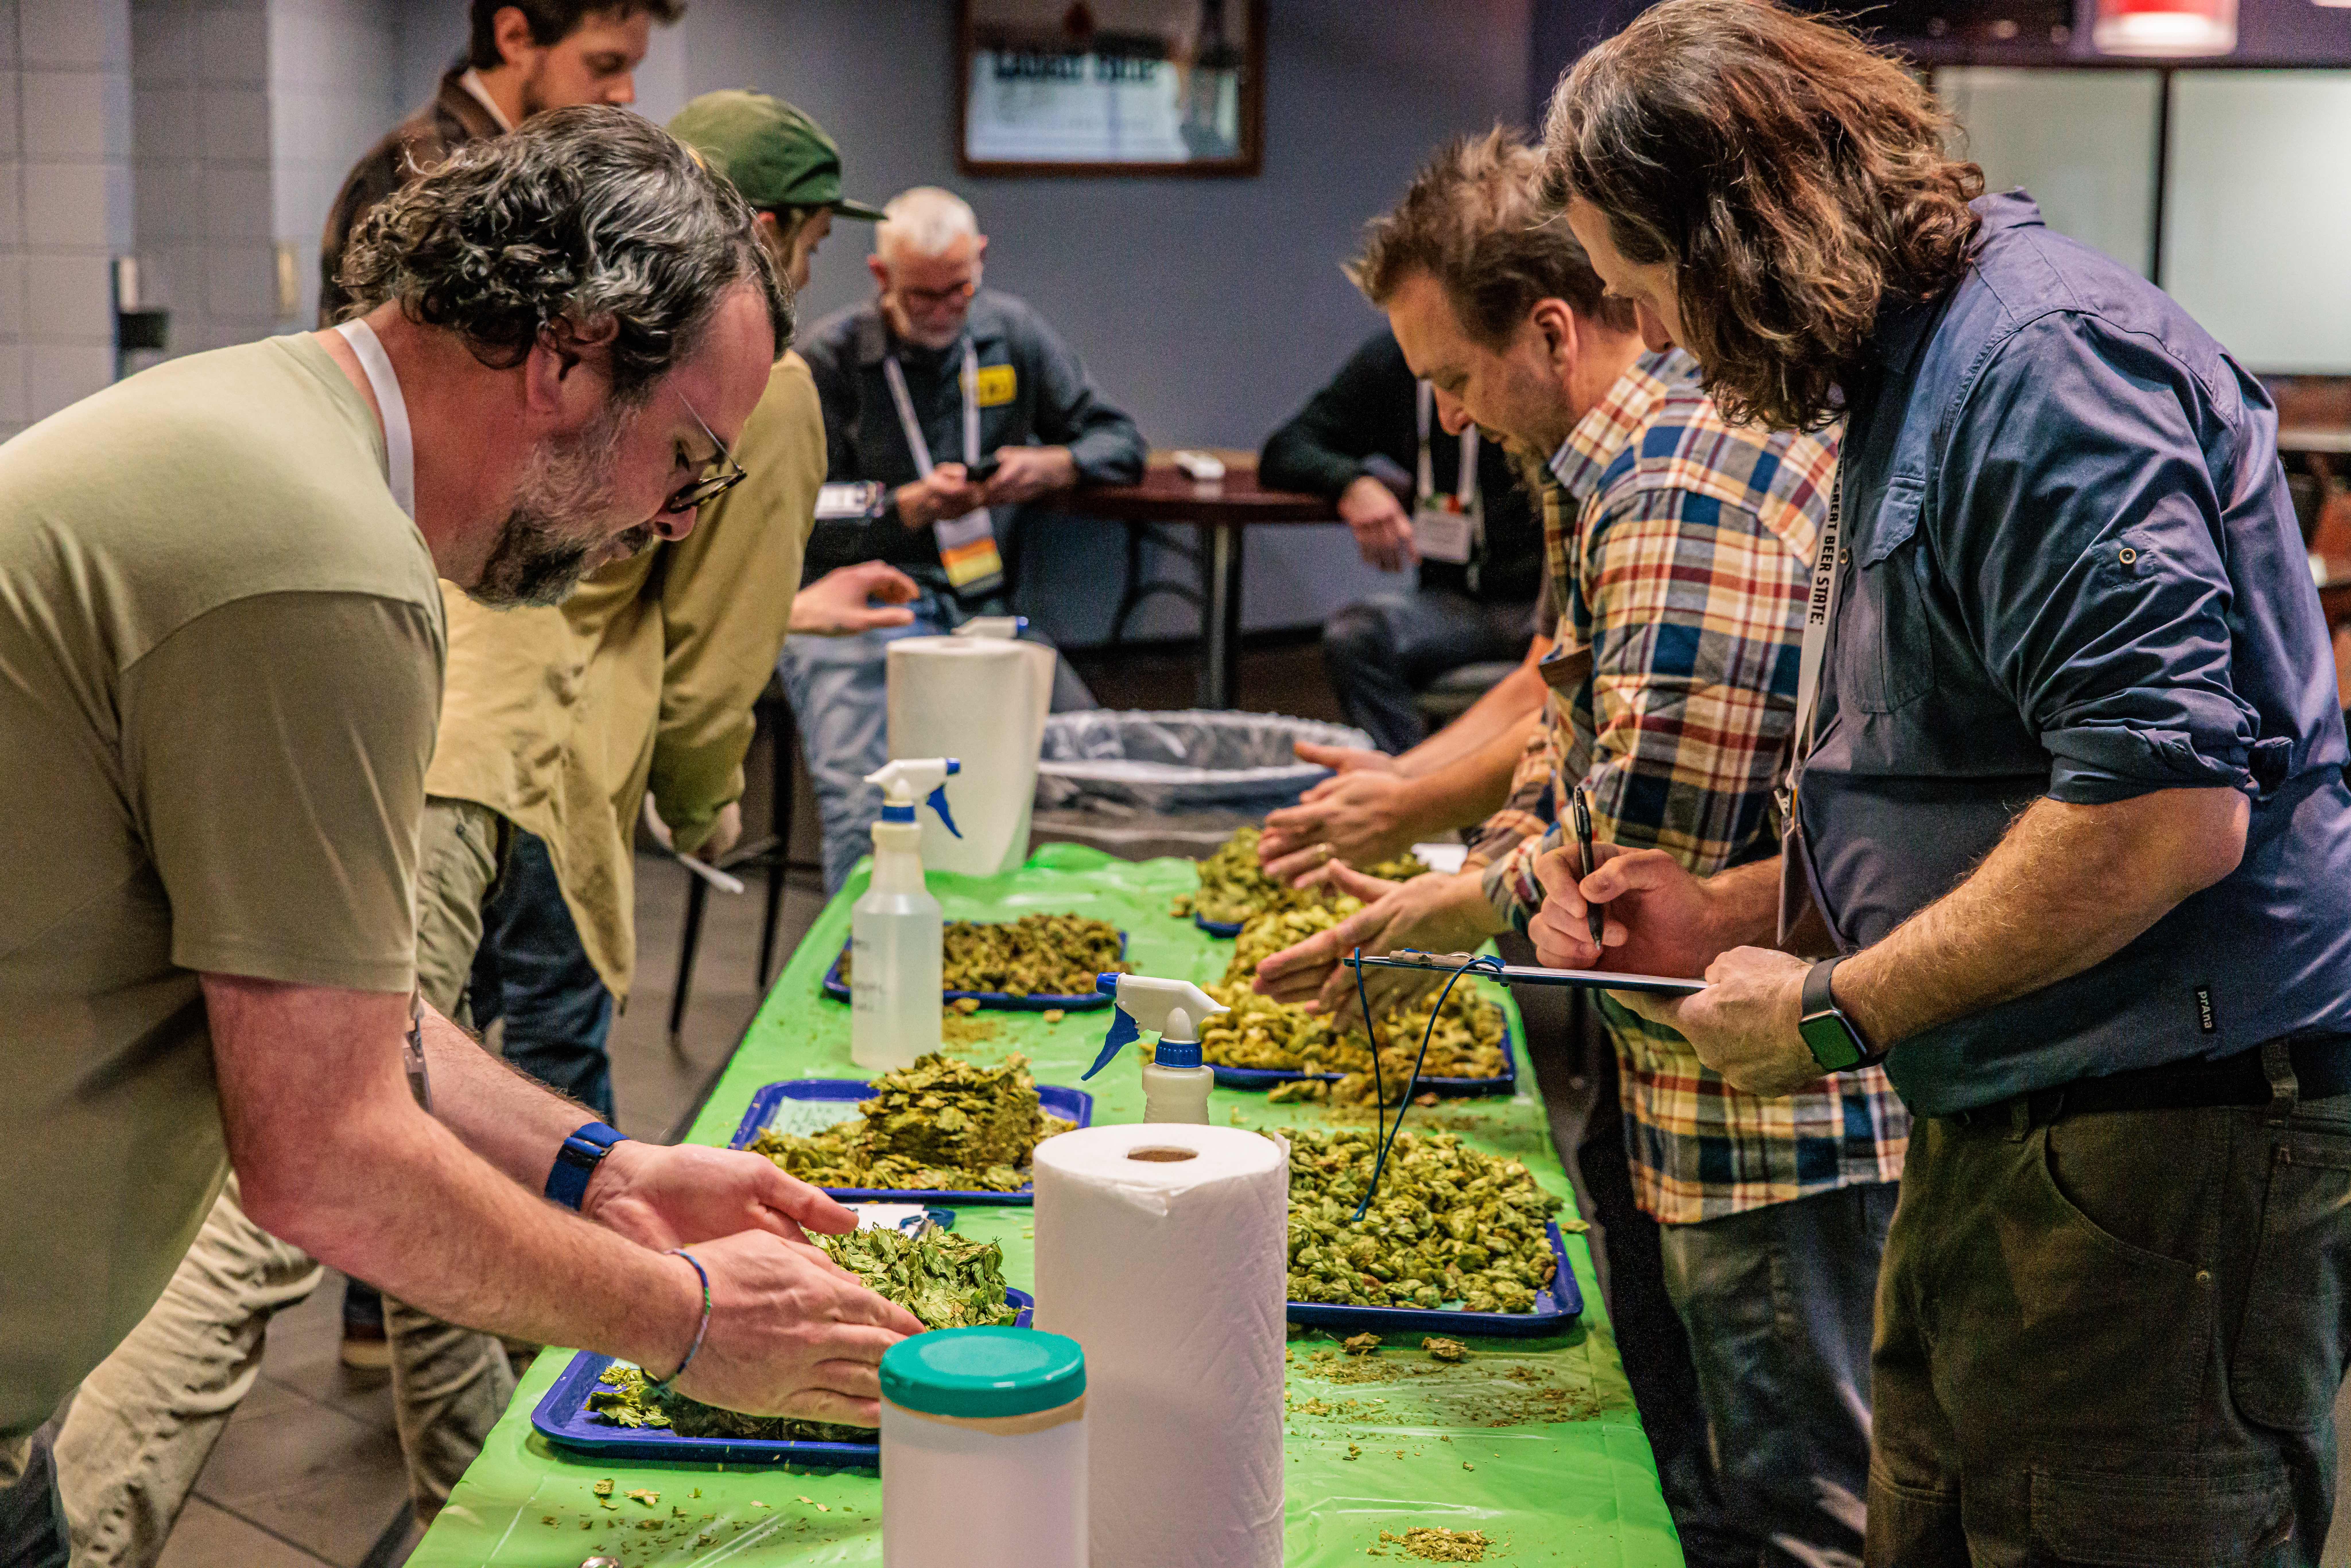 Several people gather around a table judging hop samples.